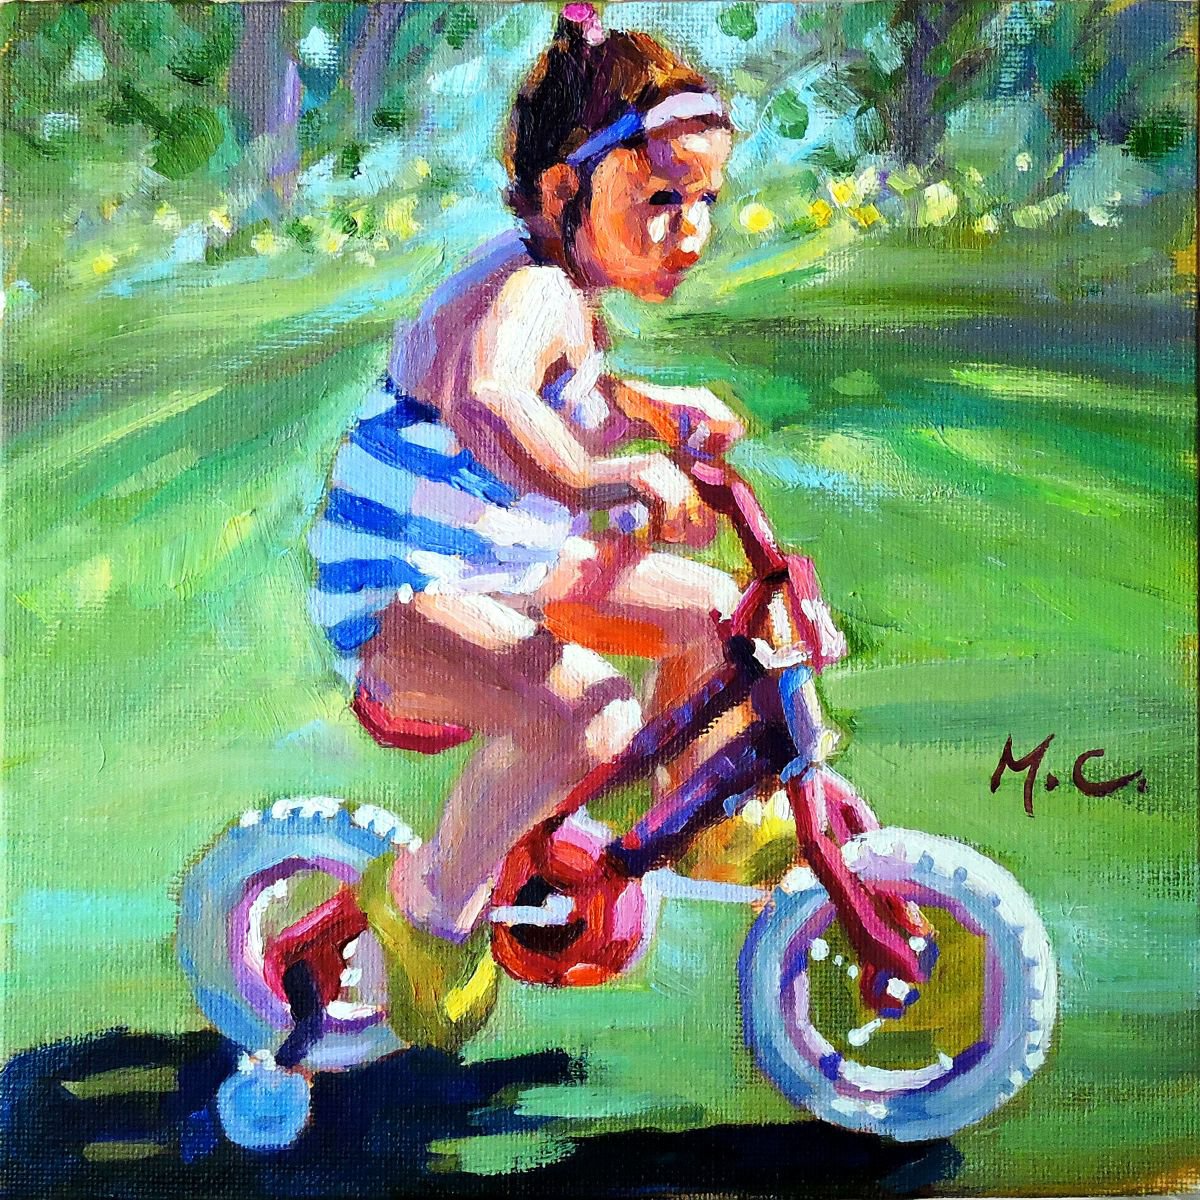 Cycling by Michelle Chen